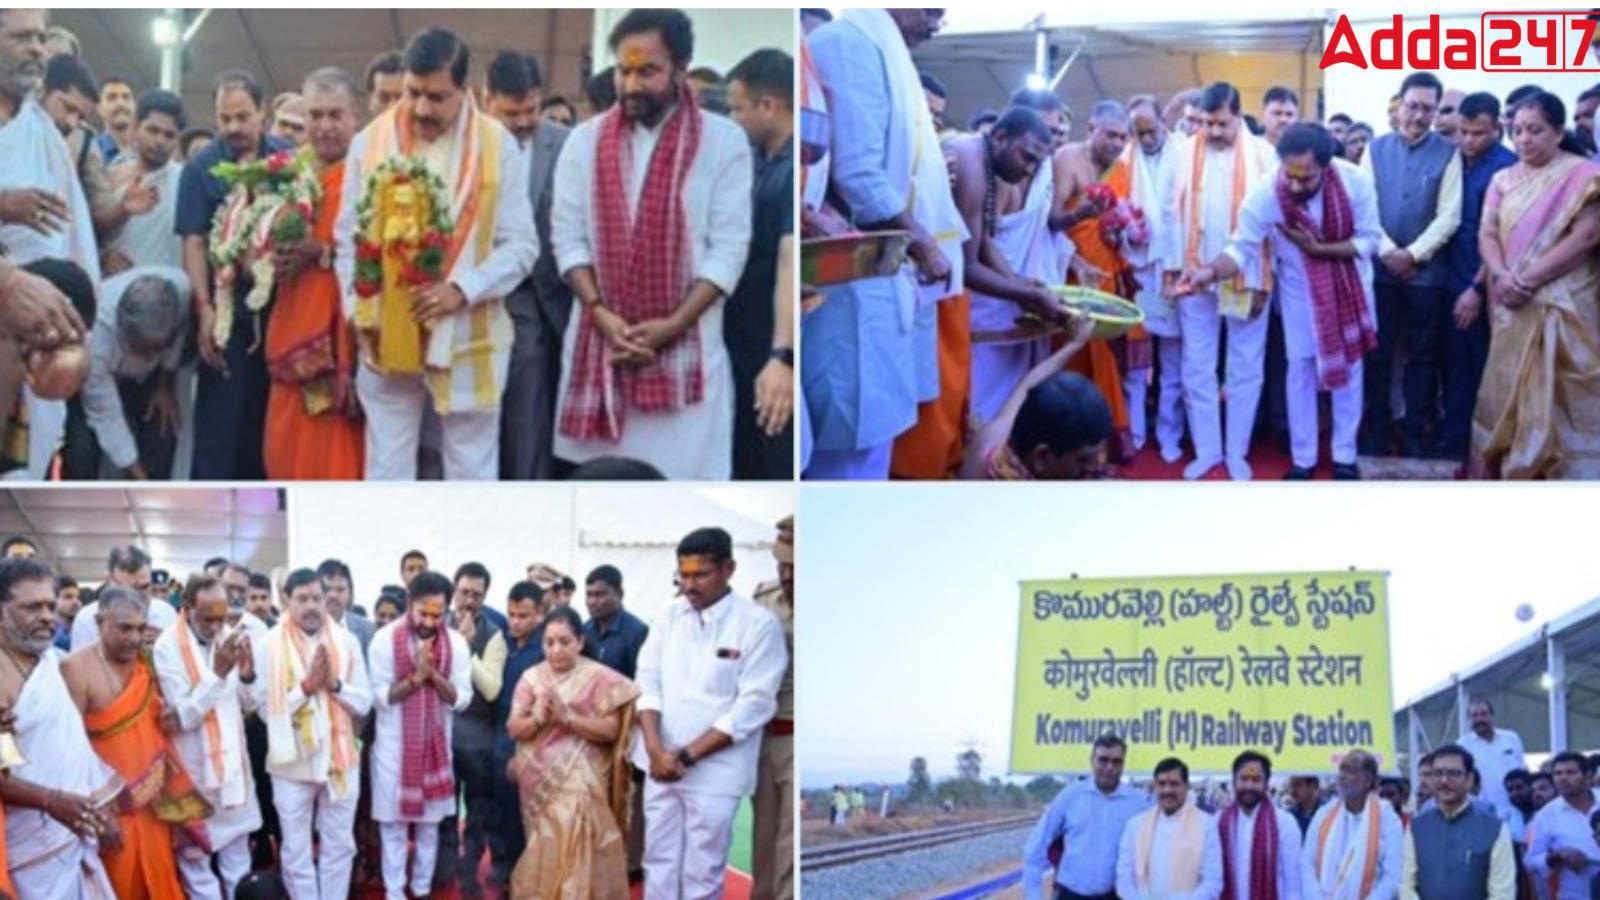 Tourism Minister Reddy Lays Foundation Stone For Komuravelli Railway Station In Siddipet, Telangana_60.1